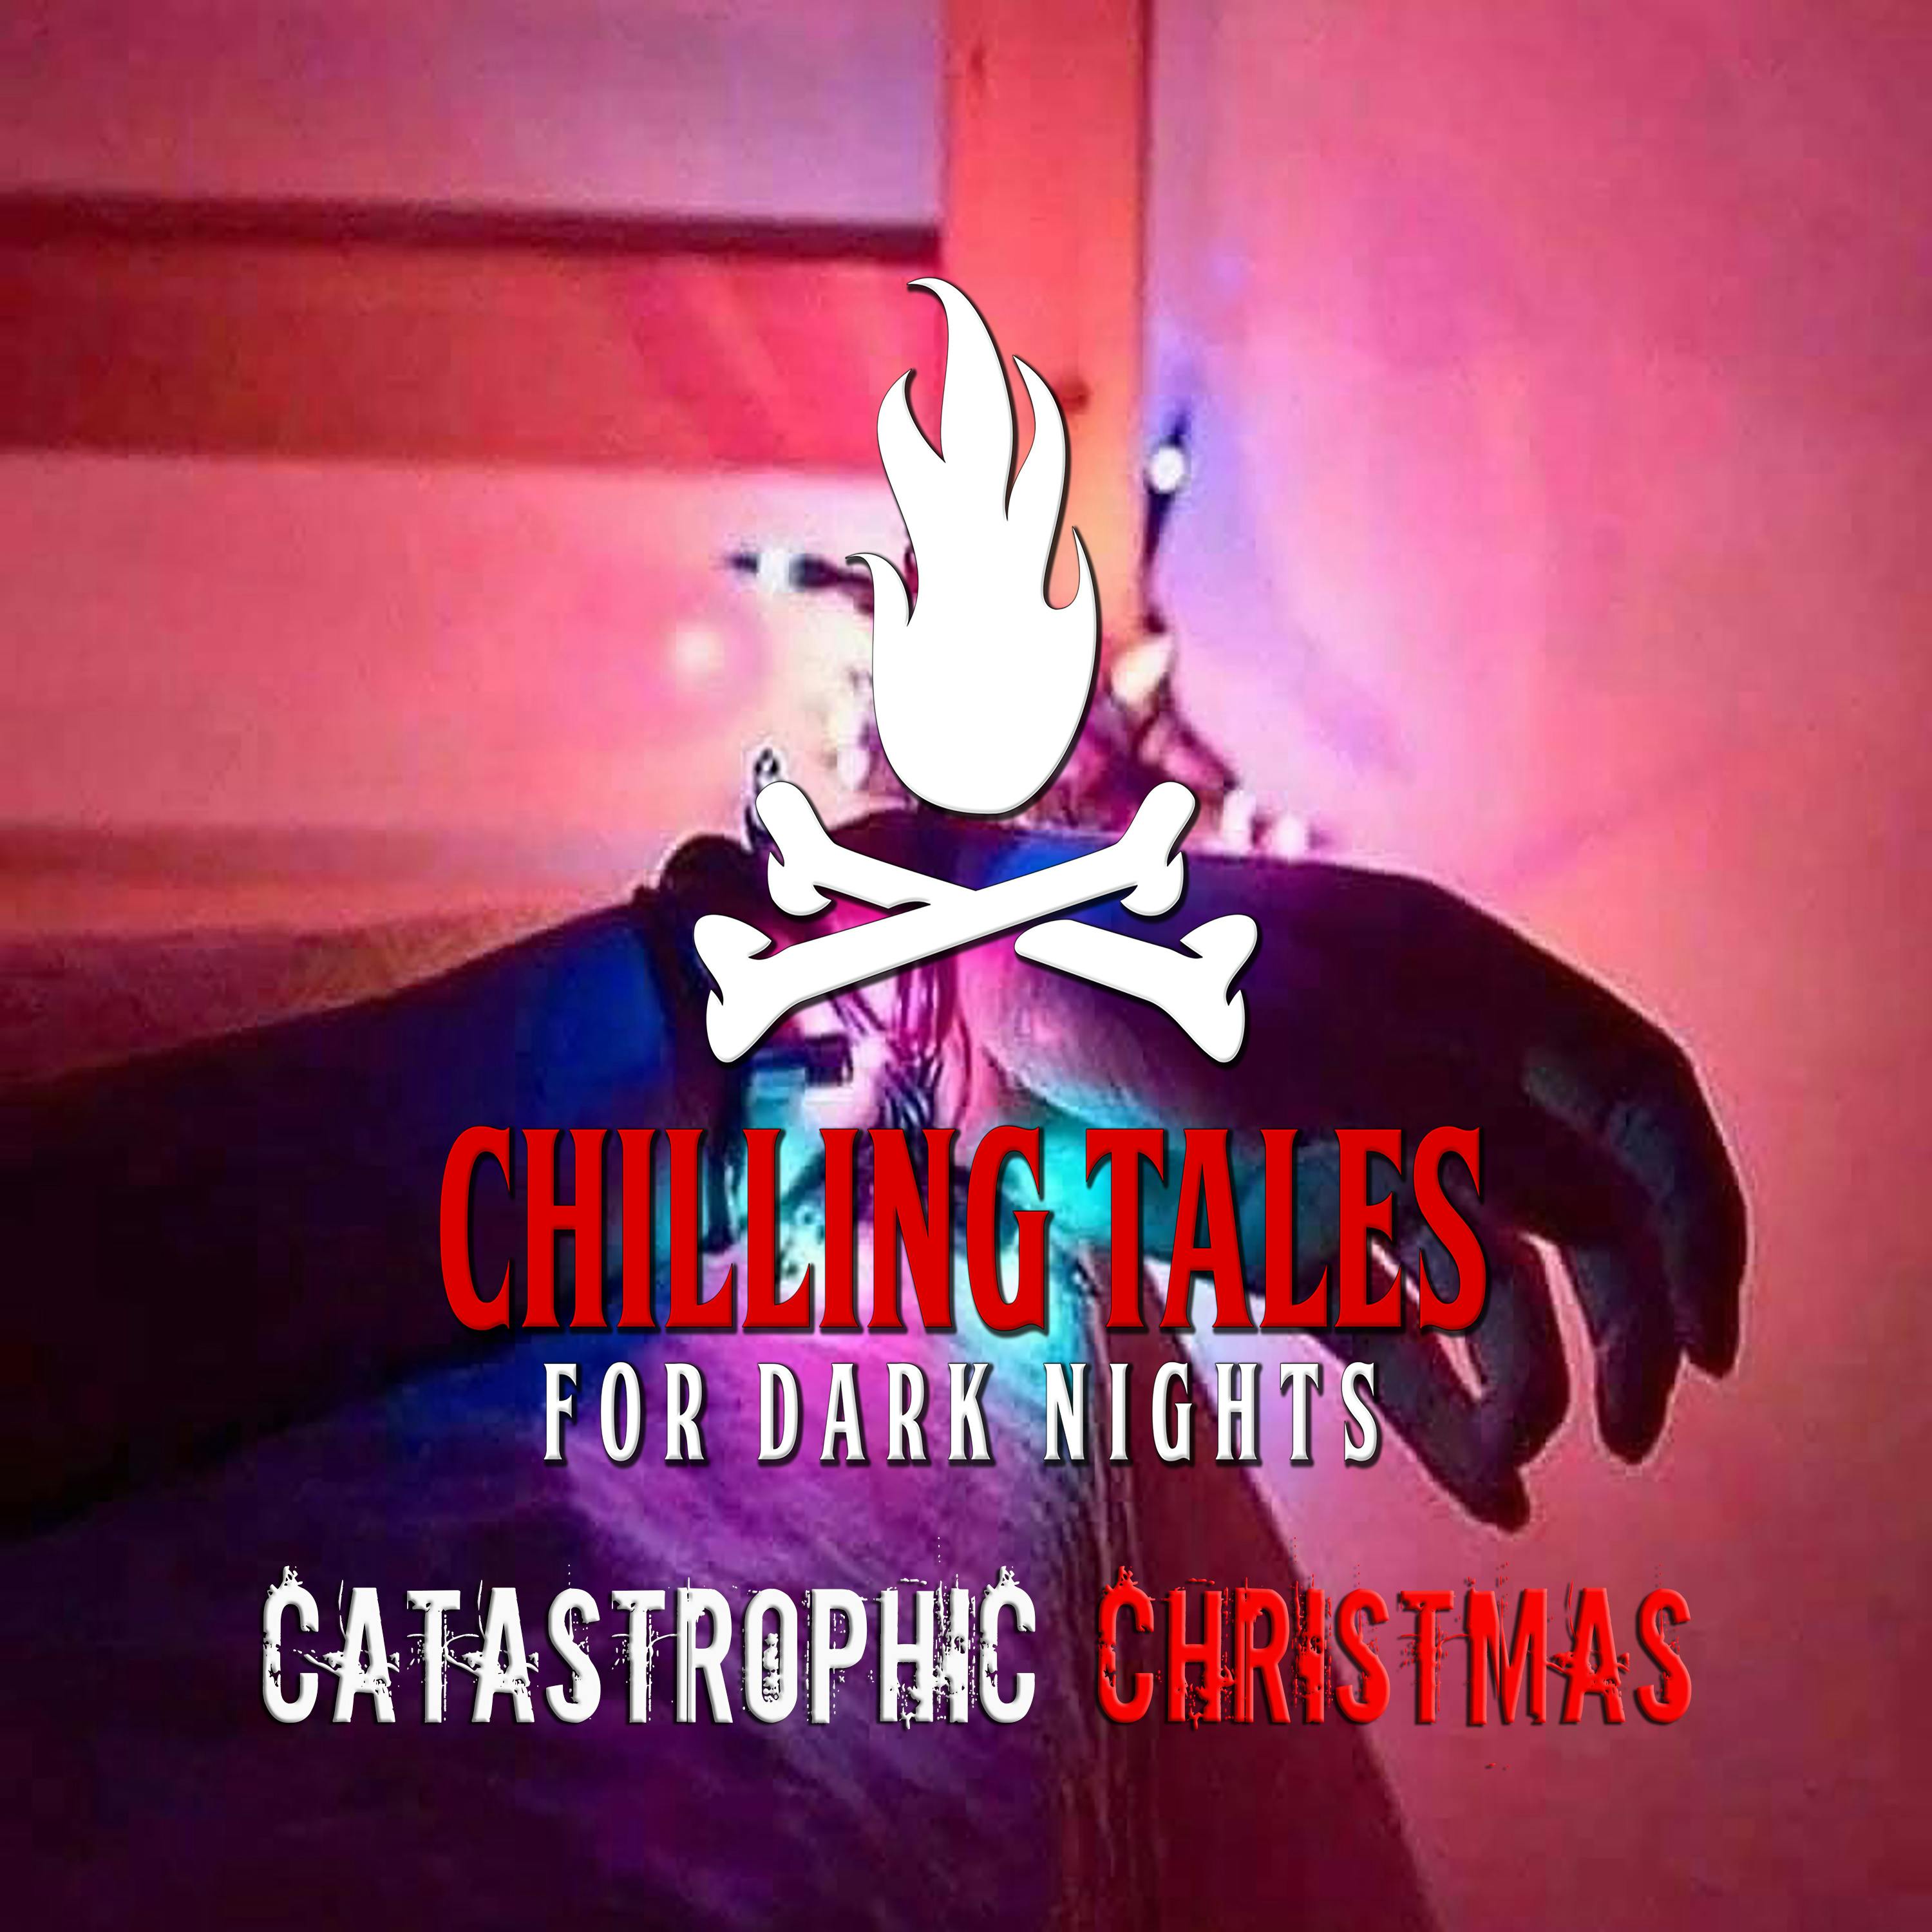 119: Catastrophic Christmas - Chilling Tales for Dark Nights